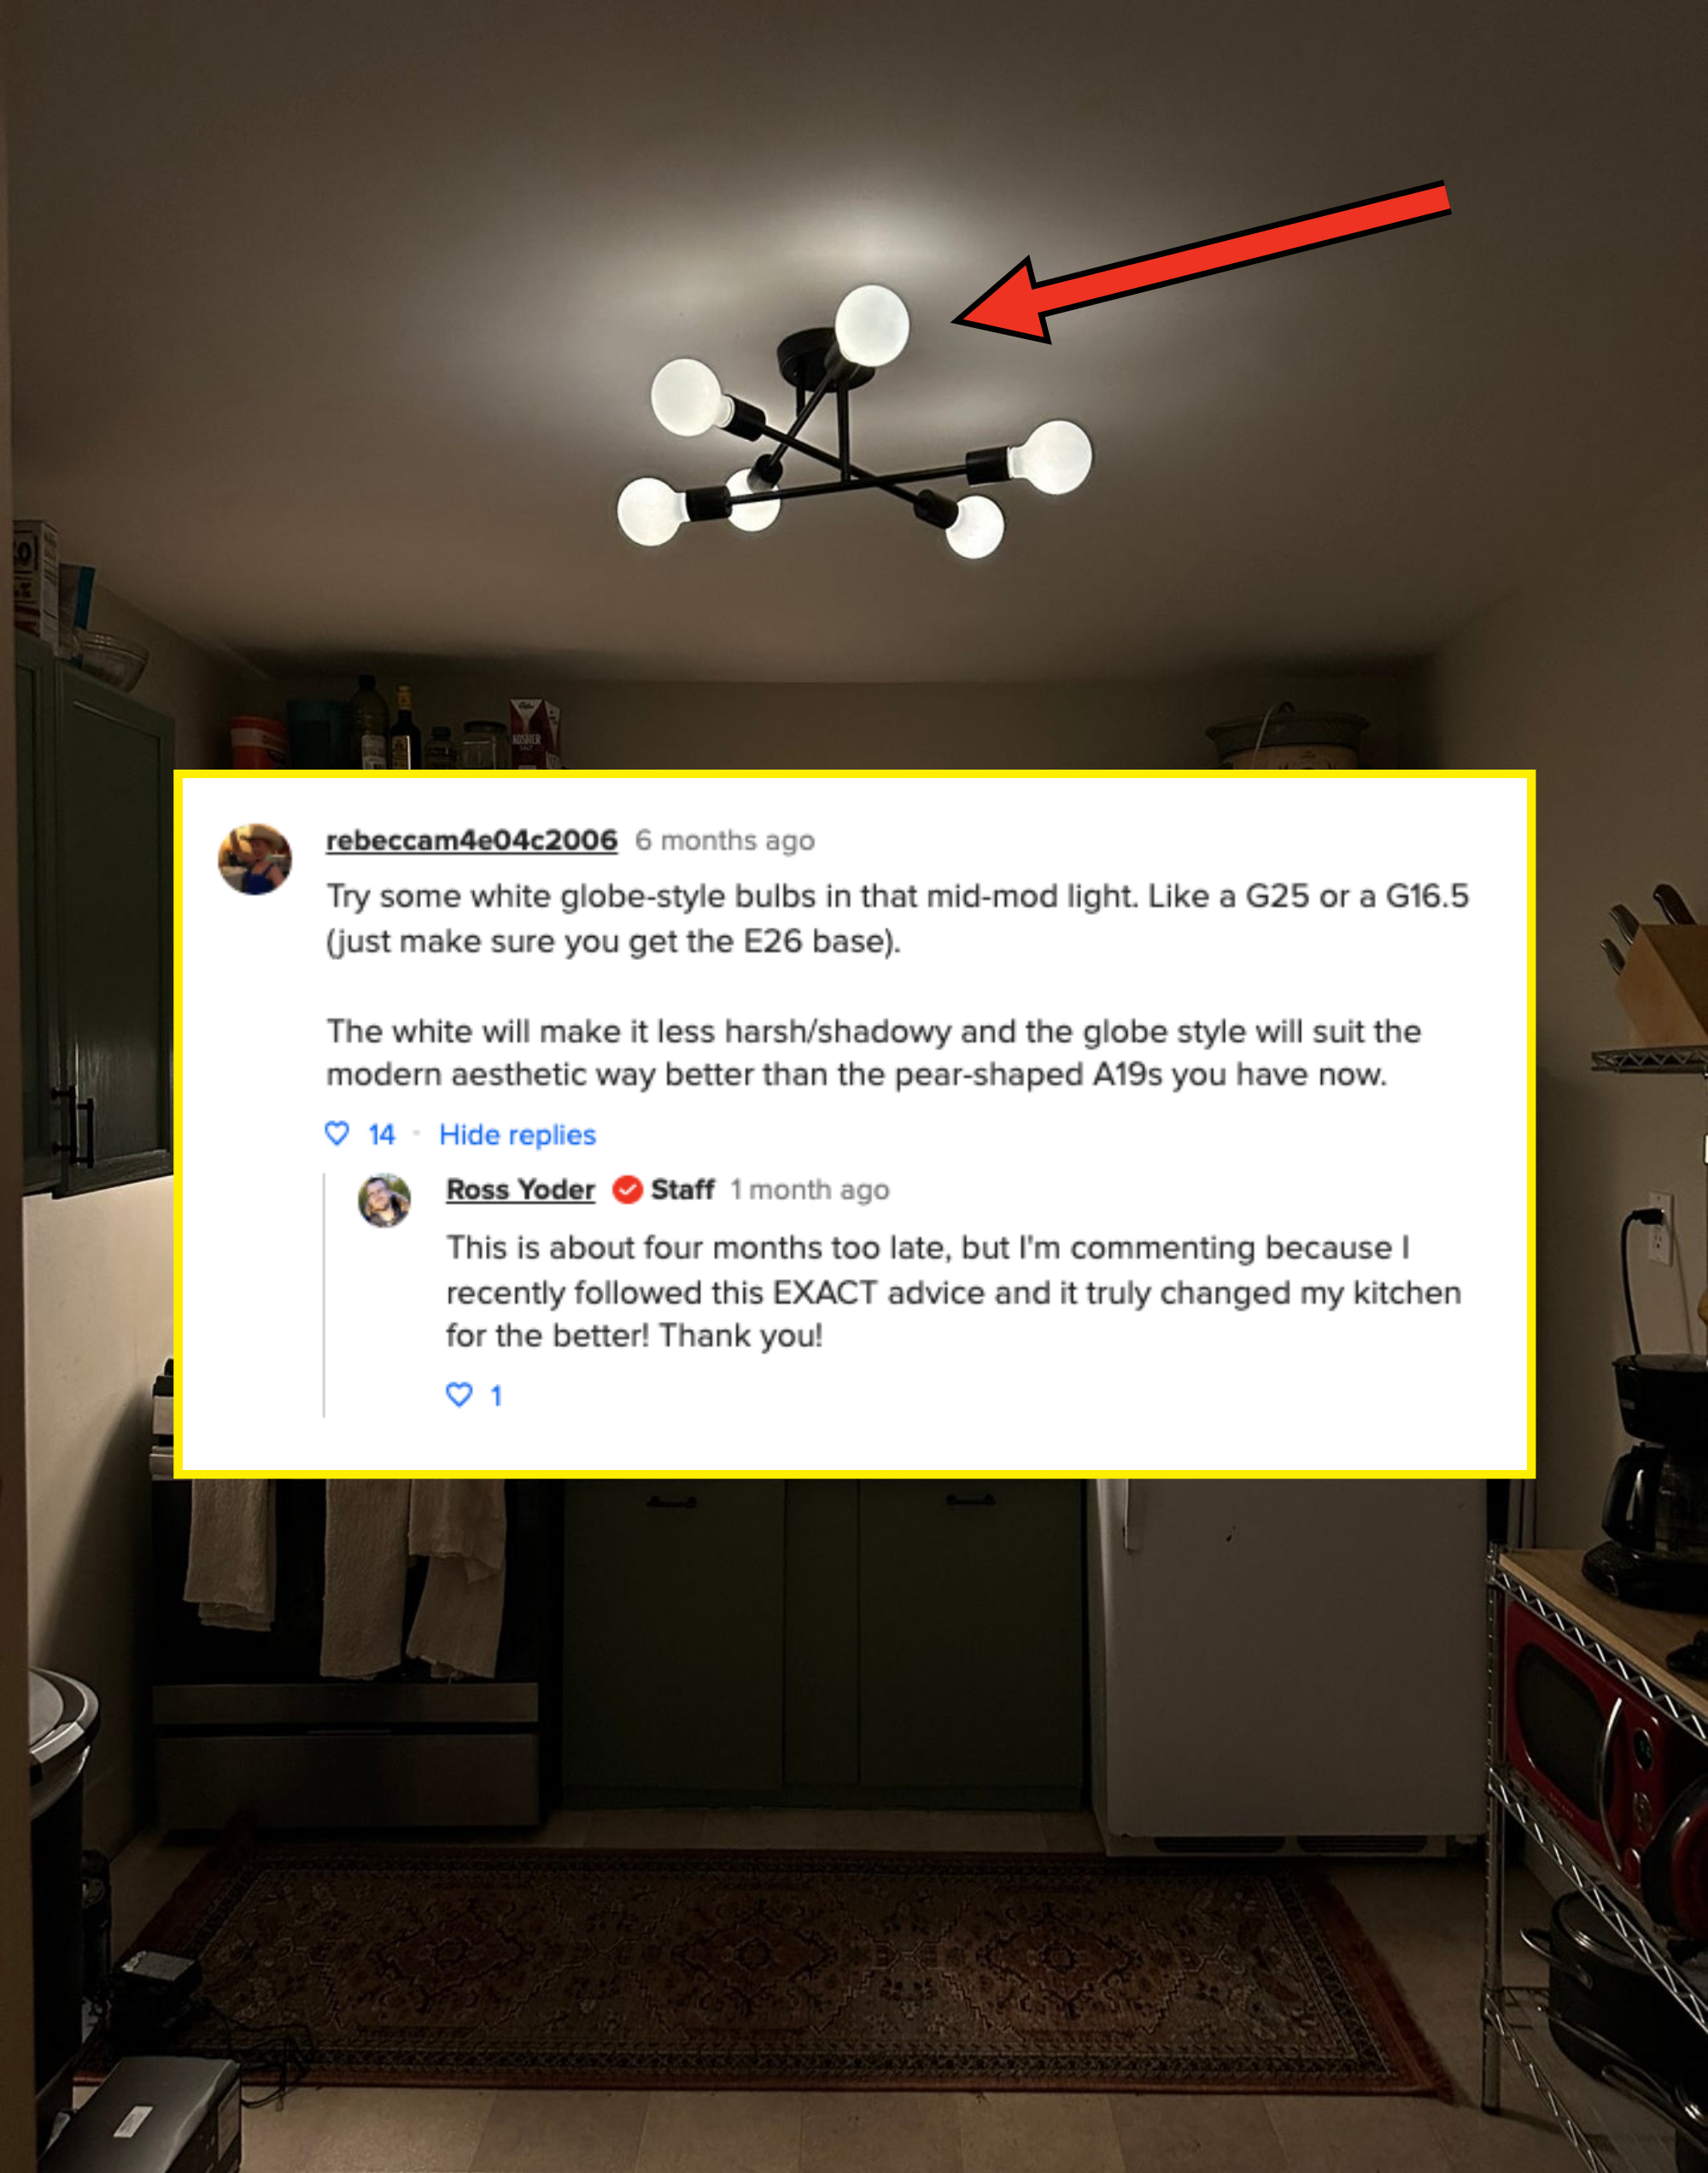 replaced lightbulbs in mid-century modern fixture with exchange between author and buzzfeed reader who suggested the swap